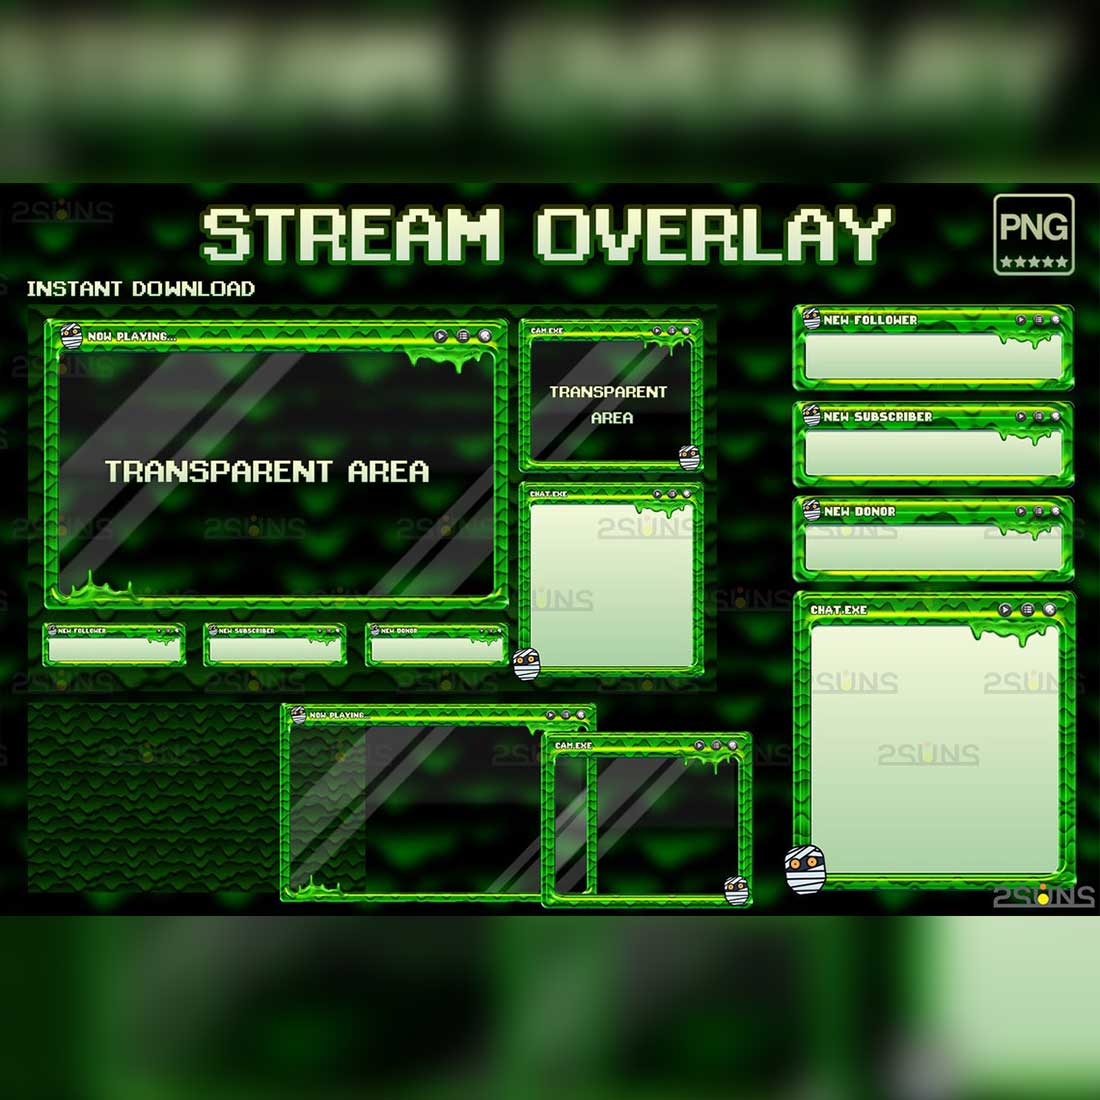 Webcam And Stream Overlay Package Cover Image.